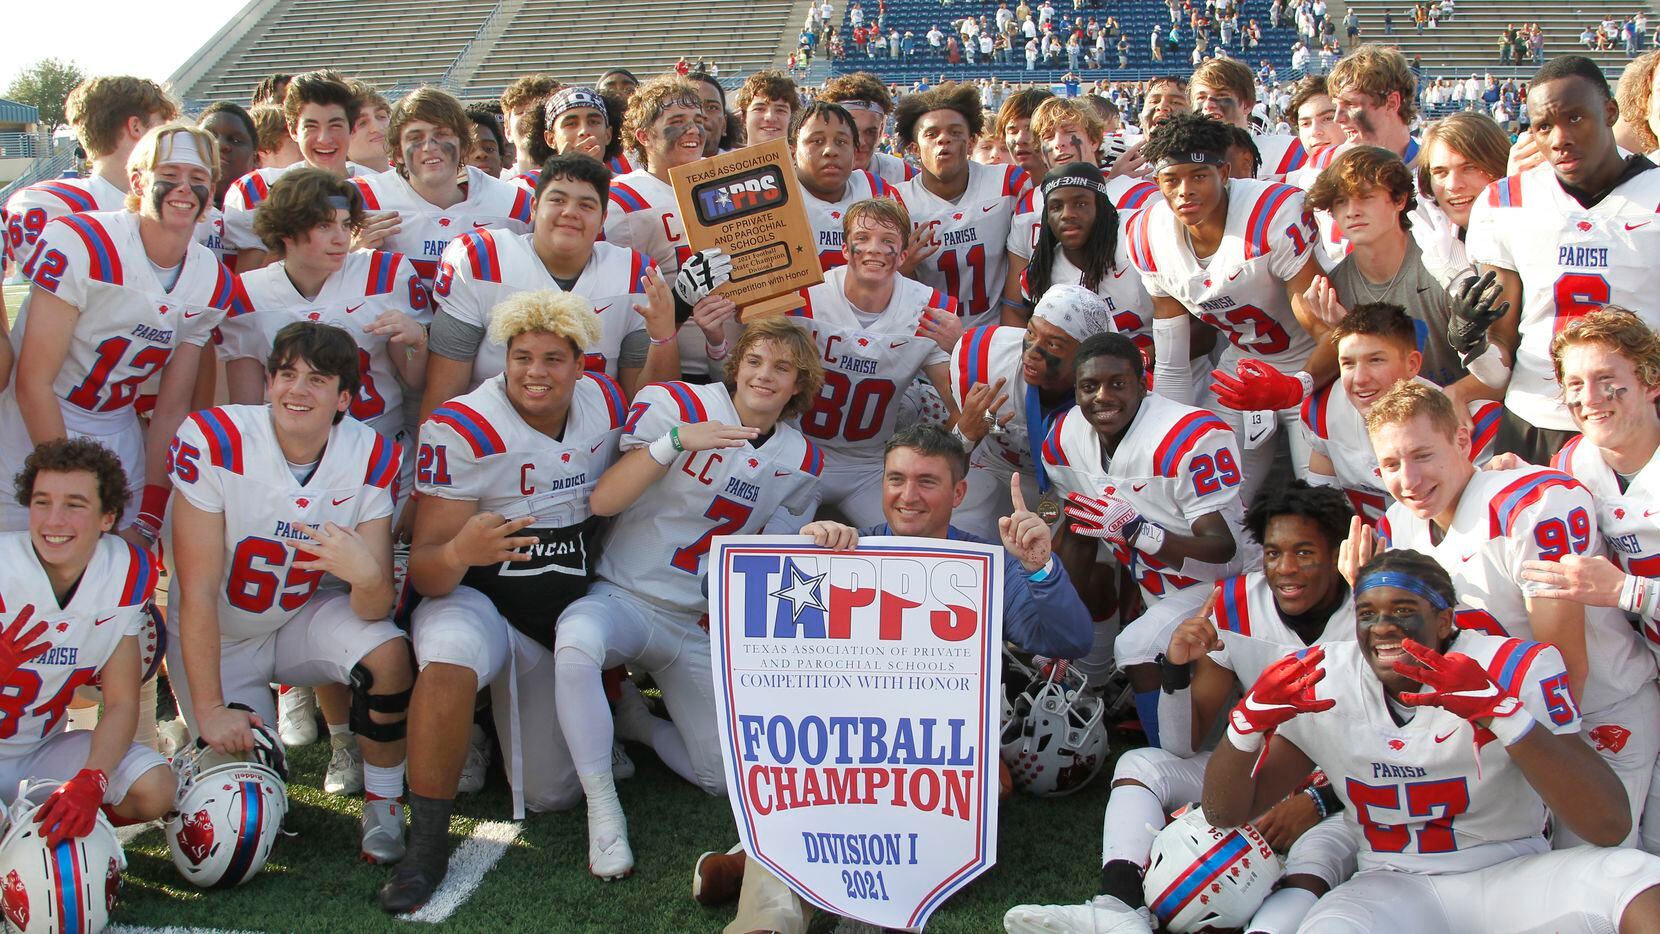 Parish Episcopal head coach Daniel Novakov poses with members of his team following their 56-17 victory over Midland Cghristian to capture the TAPPS state Division 1 trophy and title. The two teams played their TAPPS Division 1 state championship football game at Waco ISD Stadium in Waco on December 4, 2021. (Steve Hamm/ Special Contributor)